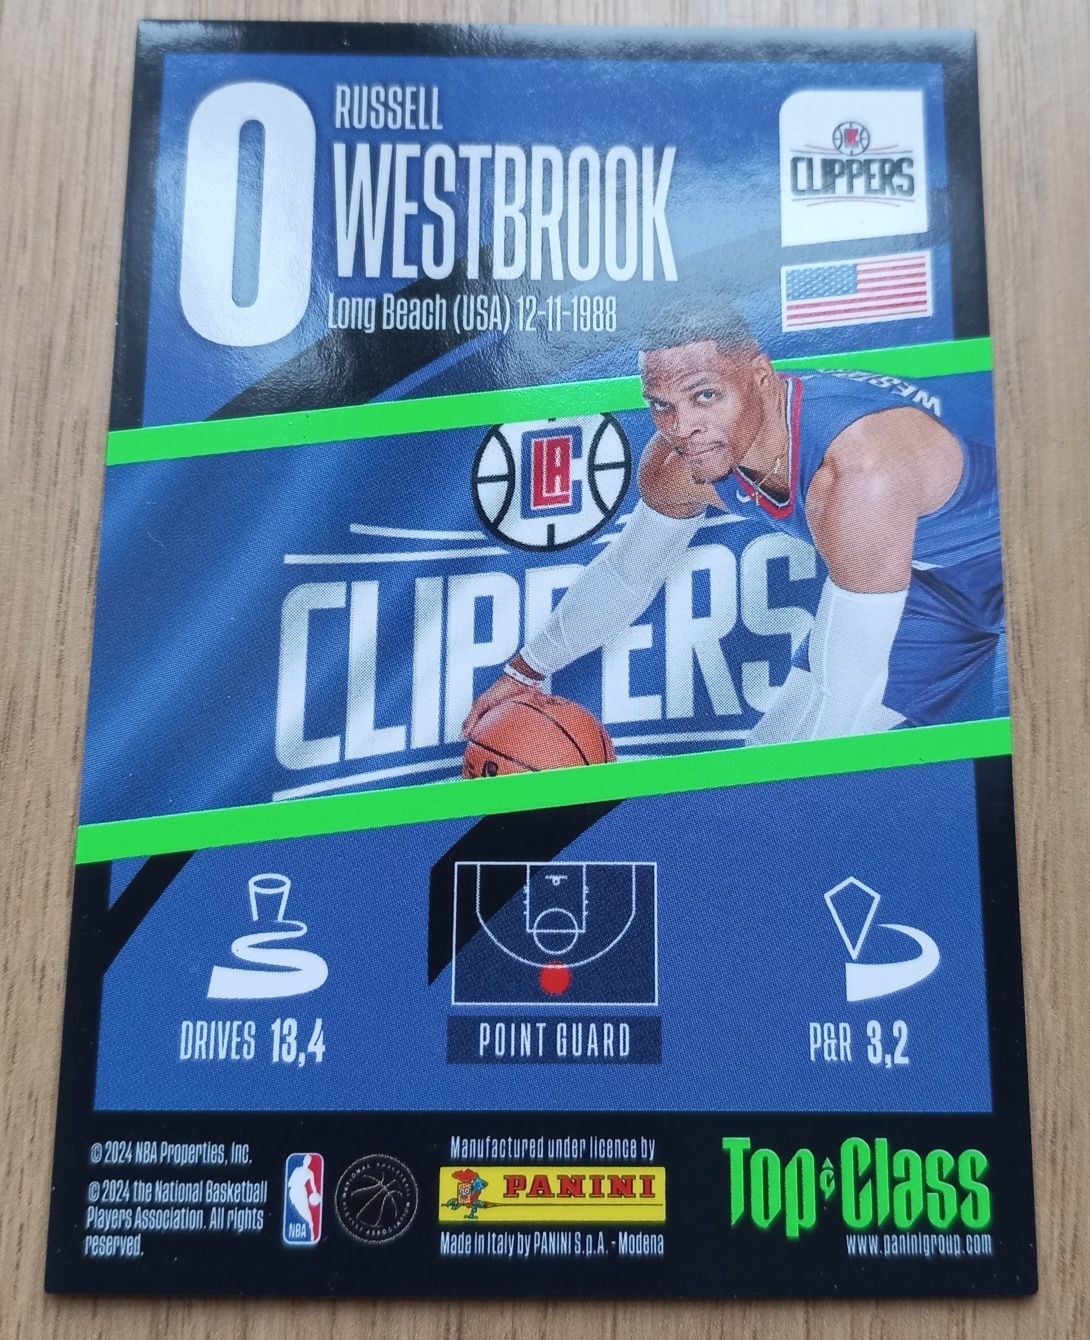 Russell Westbrook #0 Los Angeles Clippers Top & Class